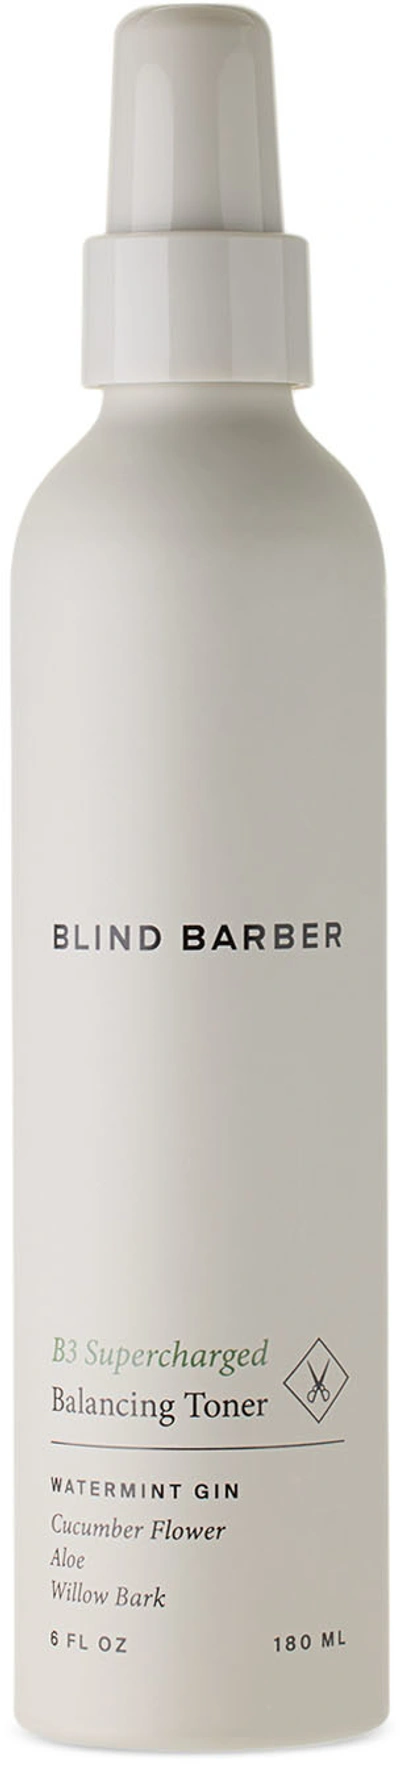 Blind Barber Watermint Gin B3 Supercharged Balancing Toner, 6 oz In Na